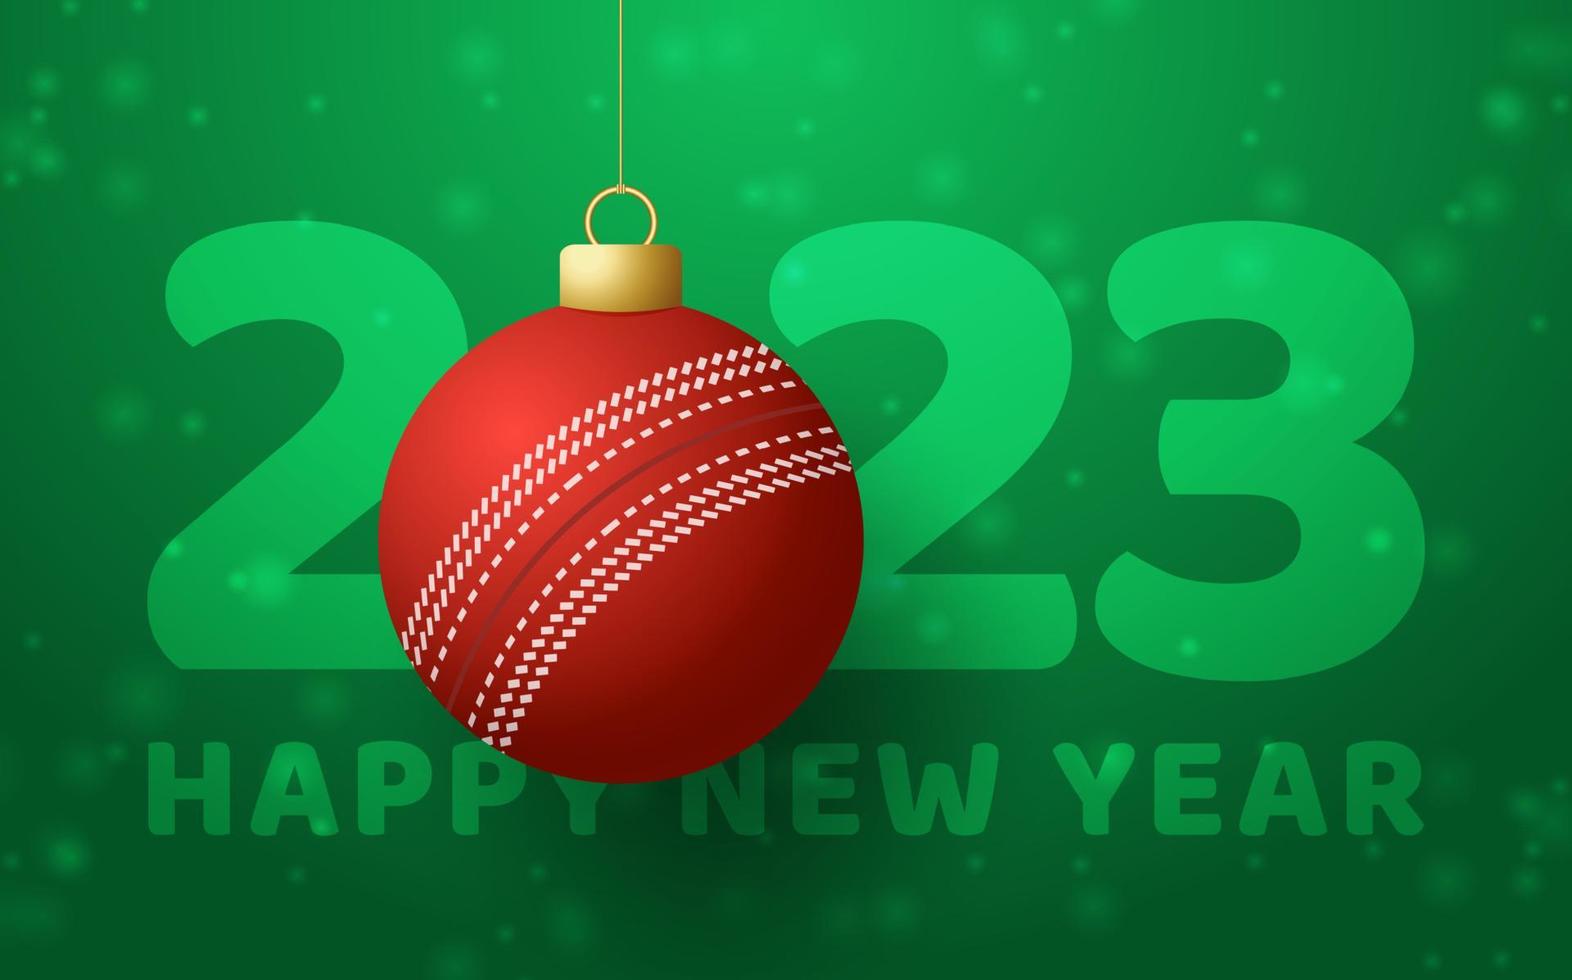 Cricket 2023 Happy New Year. Sports greeting card with golden cricket ball on the luxury background. Vector illustration.